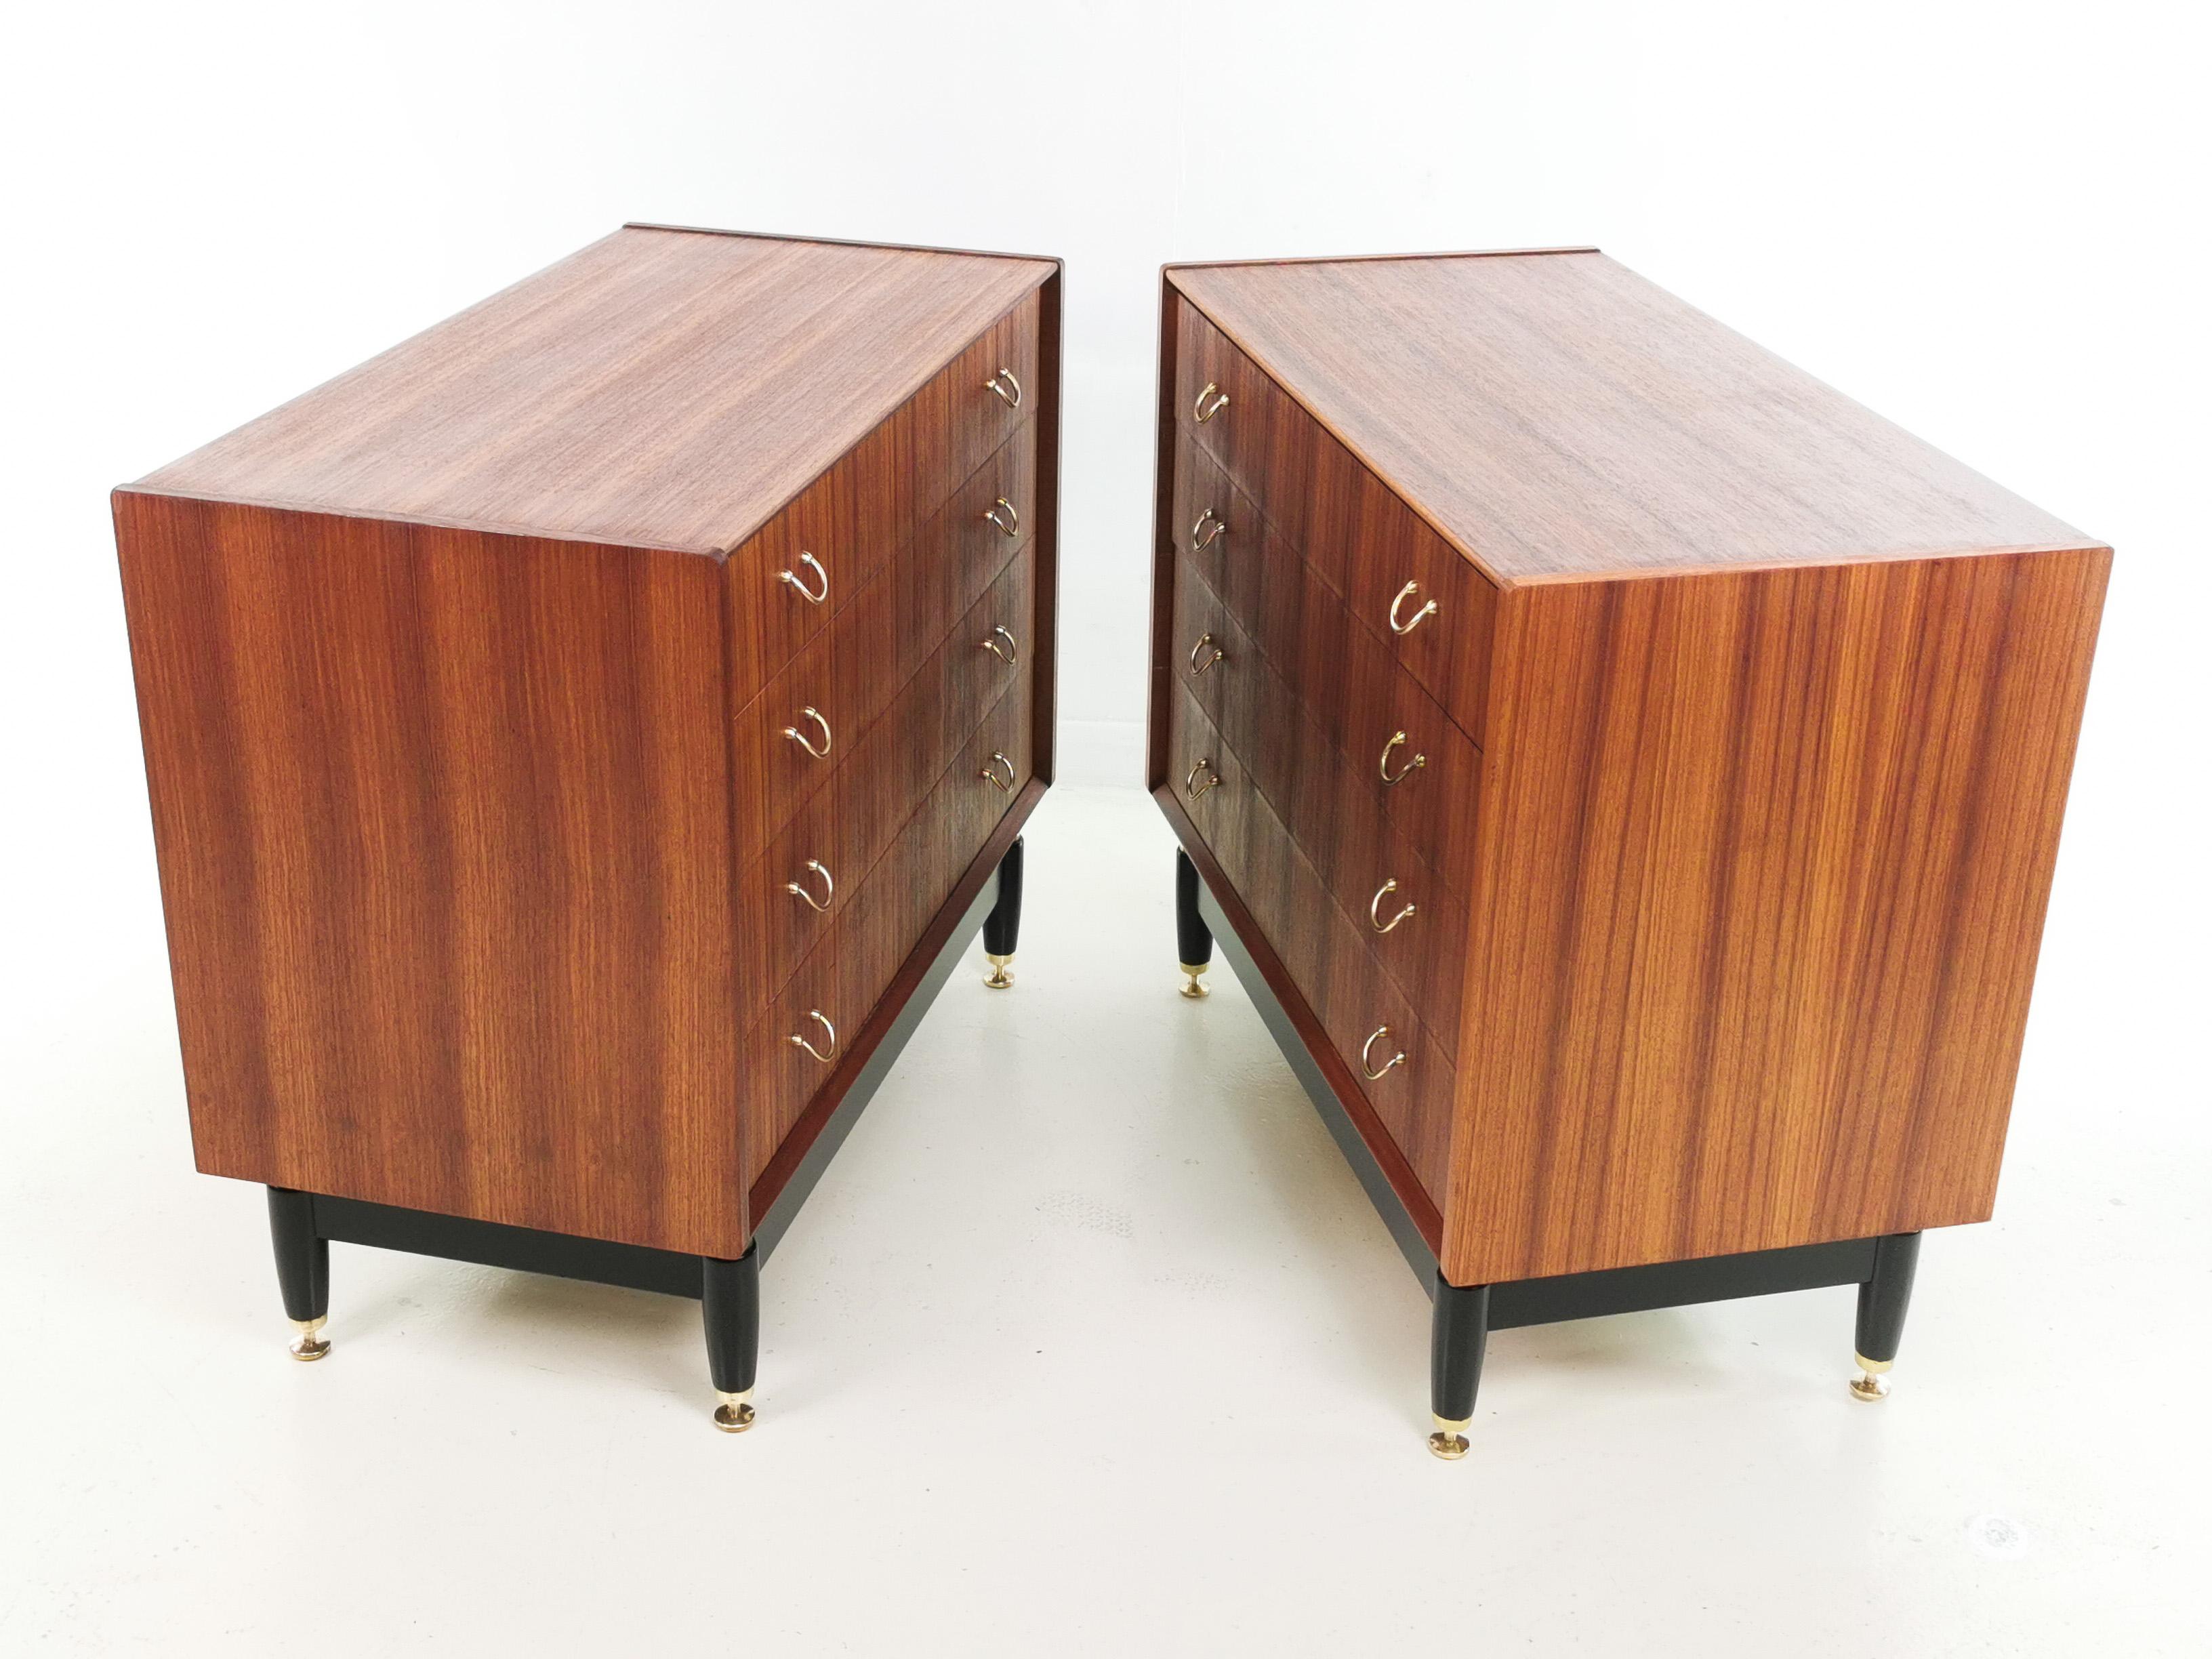 Teak chest of drawers

G Plan teak chest of drawers from the 1960s.

Sold as a pair, each unit is raised on an ebonized base with brass cup feet to the front and the drawers feature the original brass drawer pulls.

Manufactured by Ernest